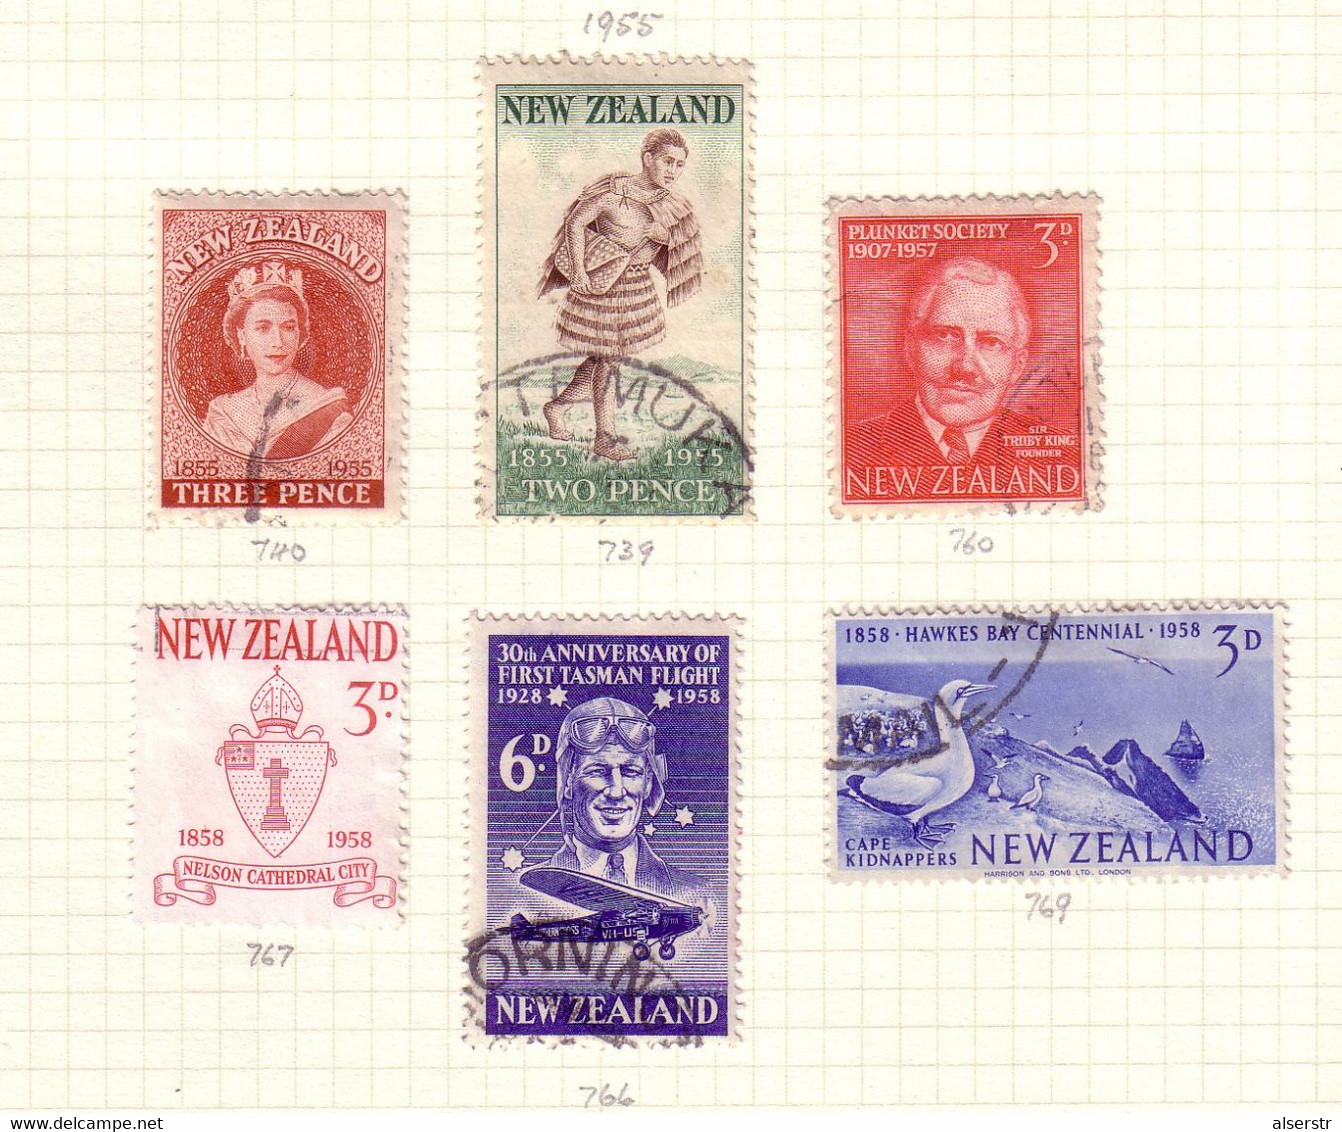 New Zealand lot of older issues, many high values